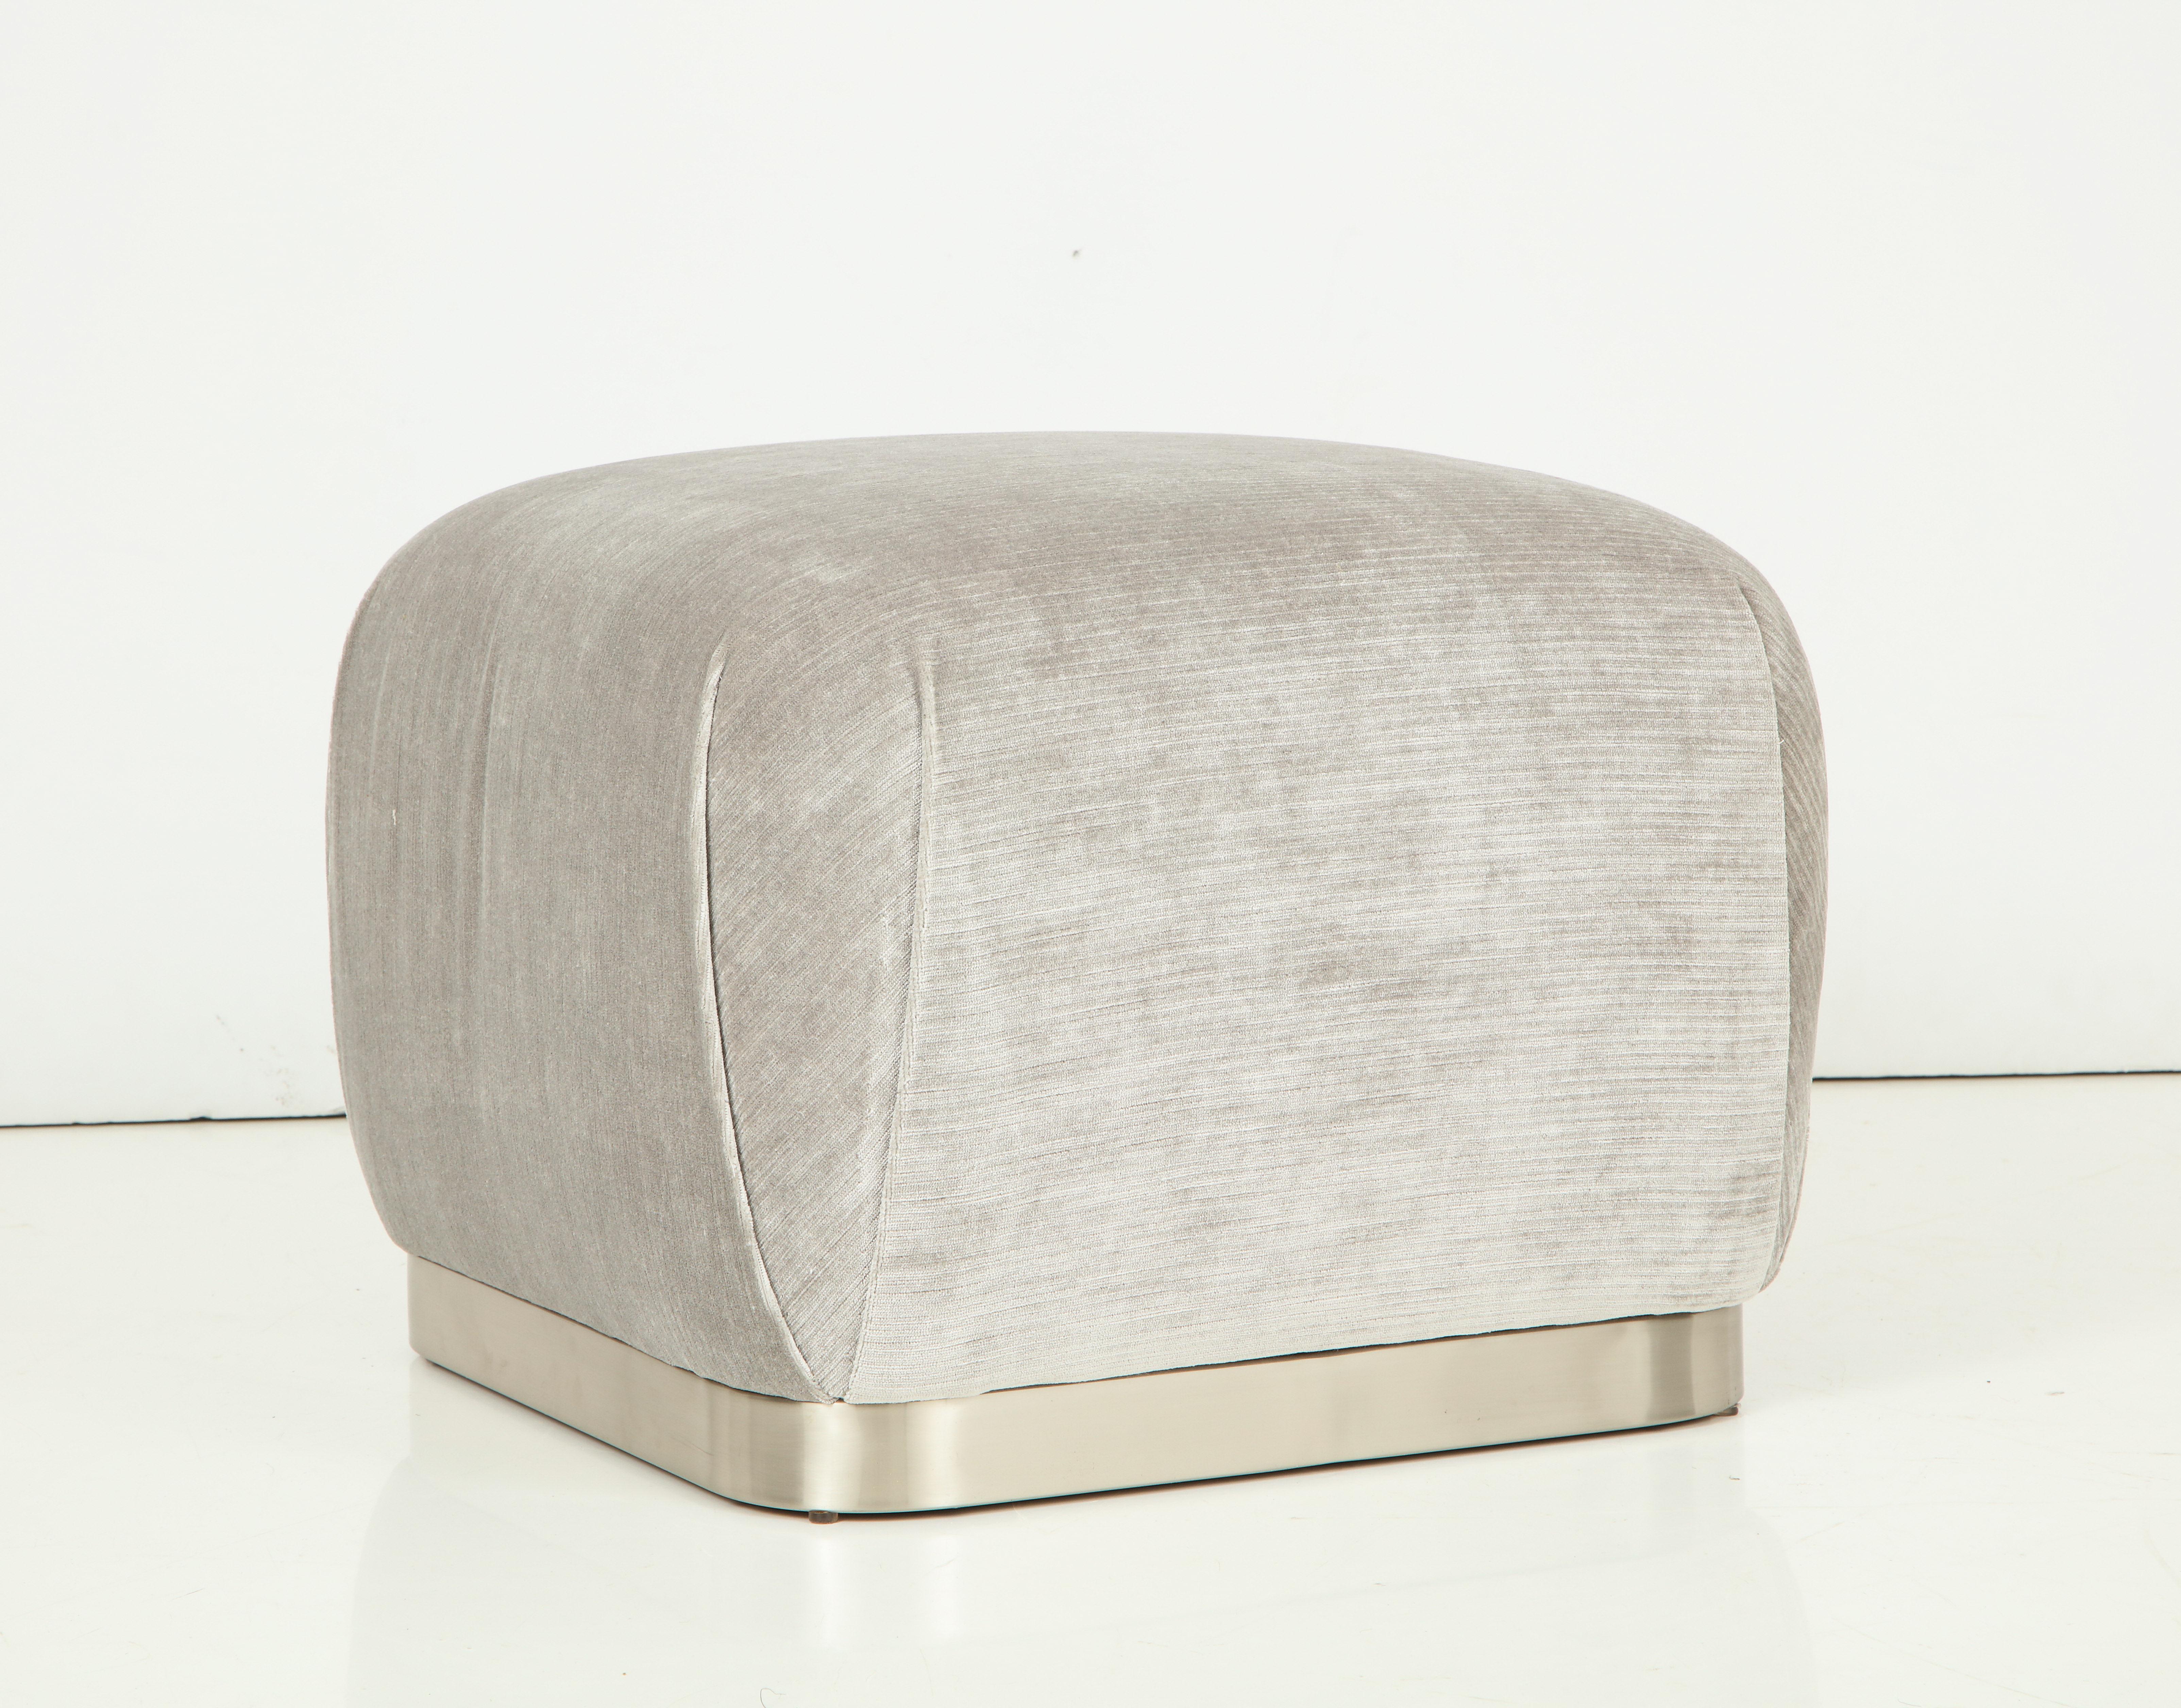 Pair of modernist ottomans newly upholstered in a Romo steel grey velvet with satin finished steel/nickel bases.